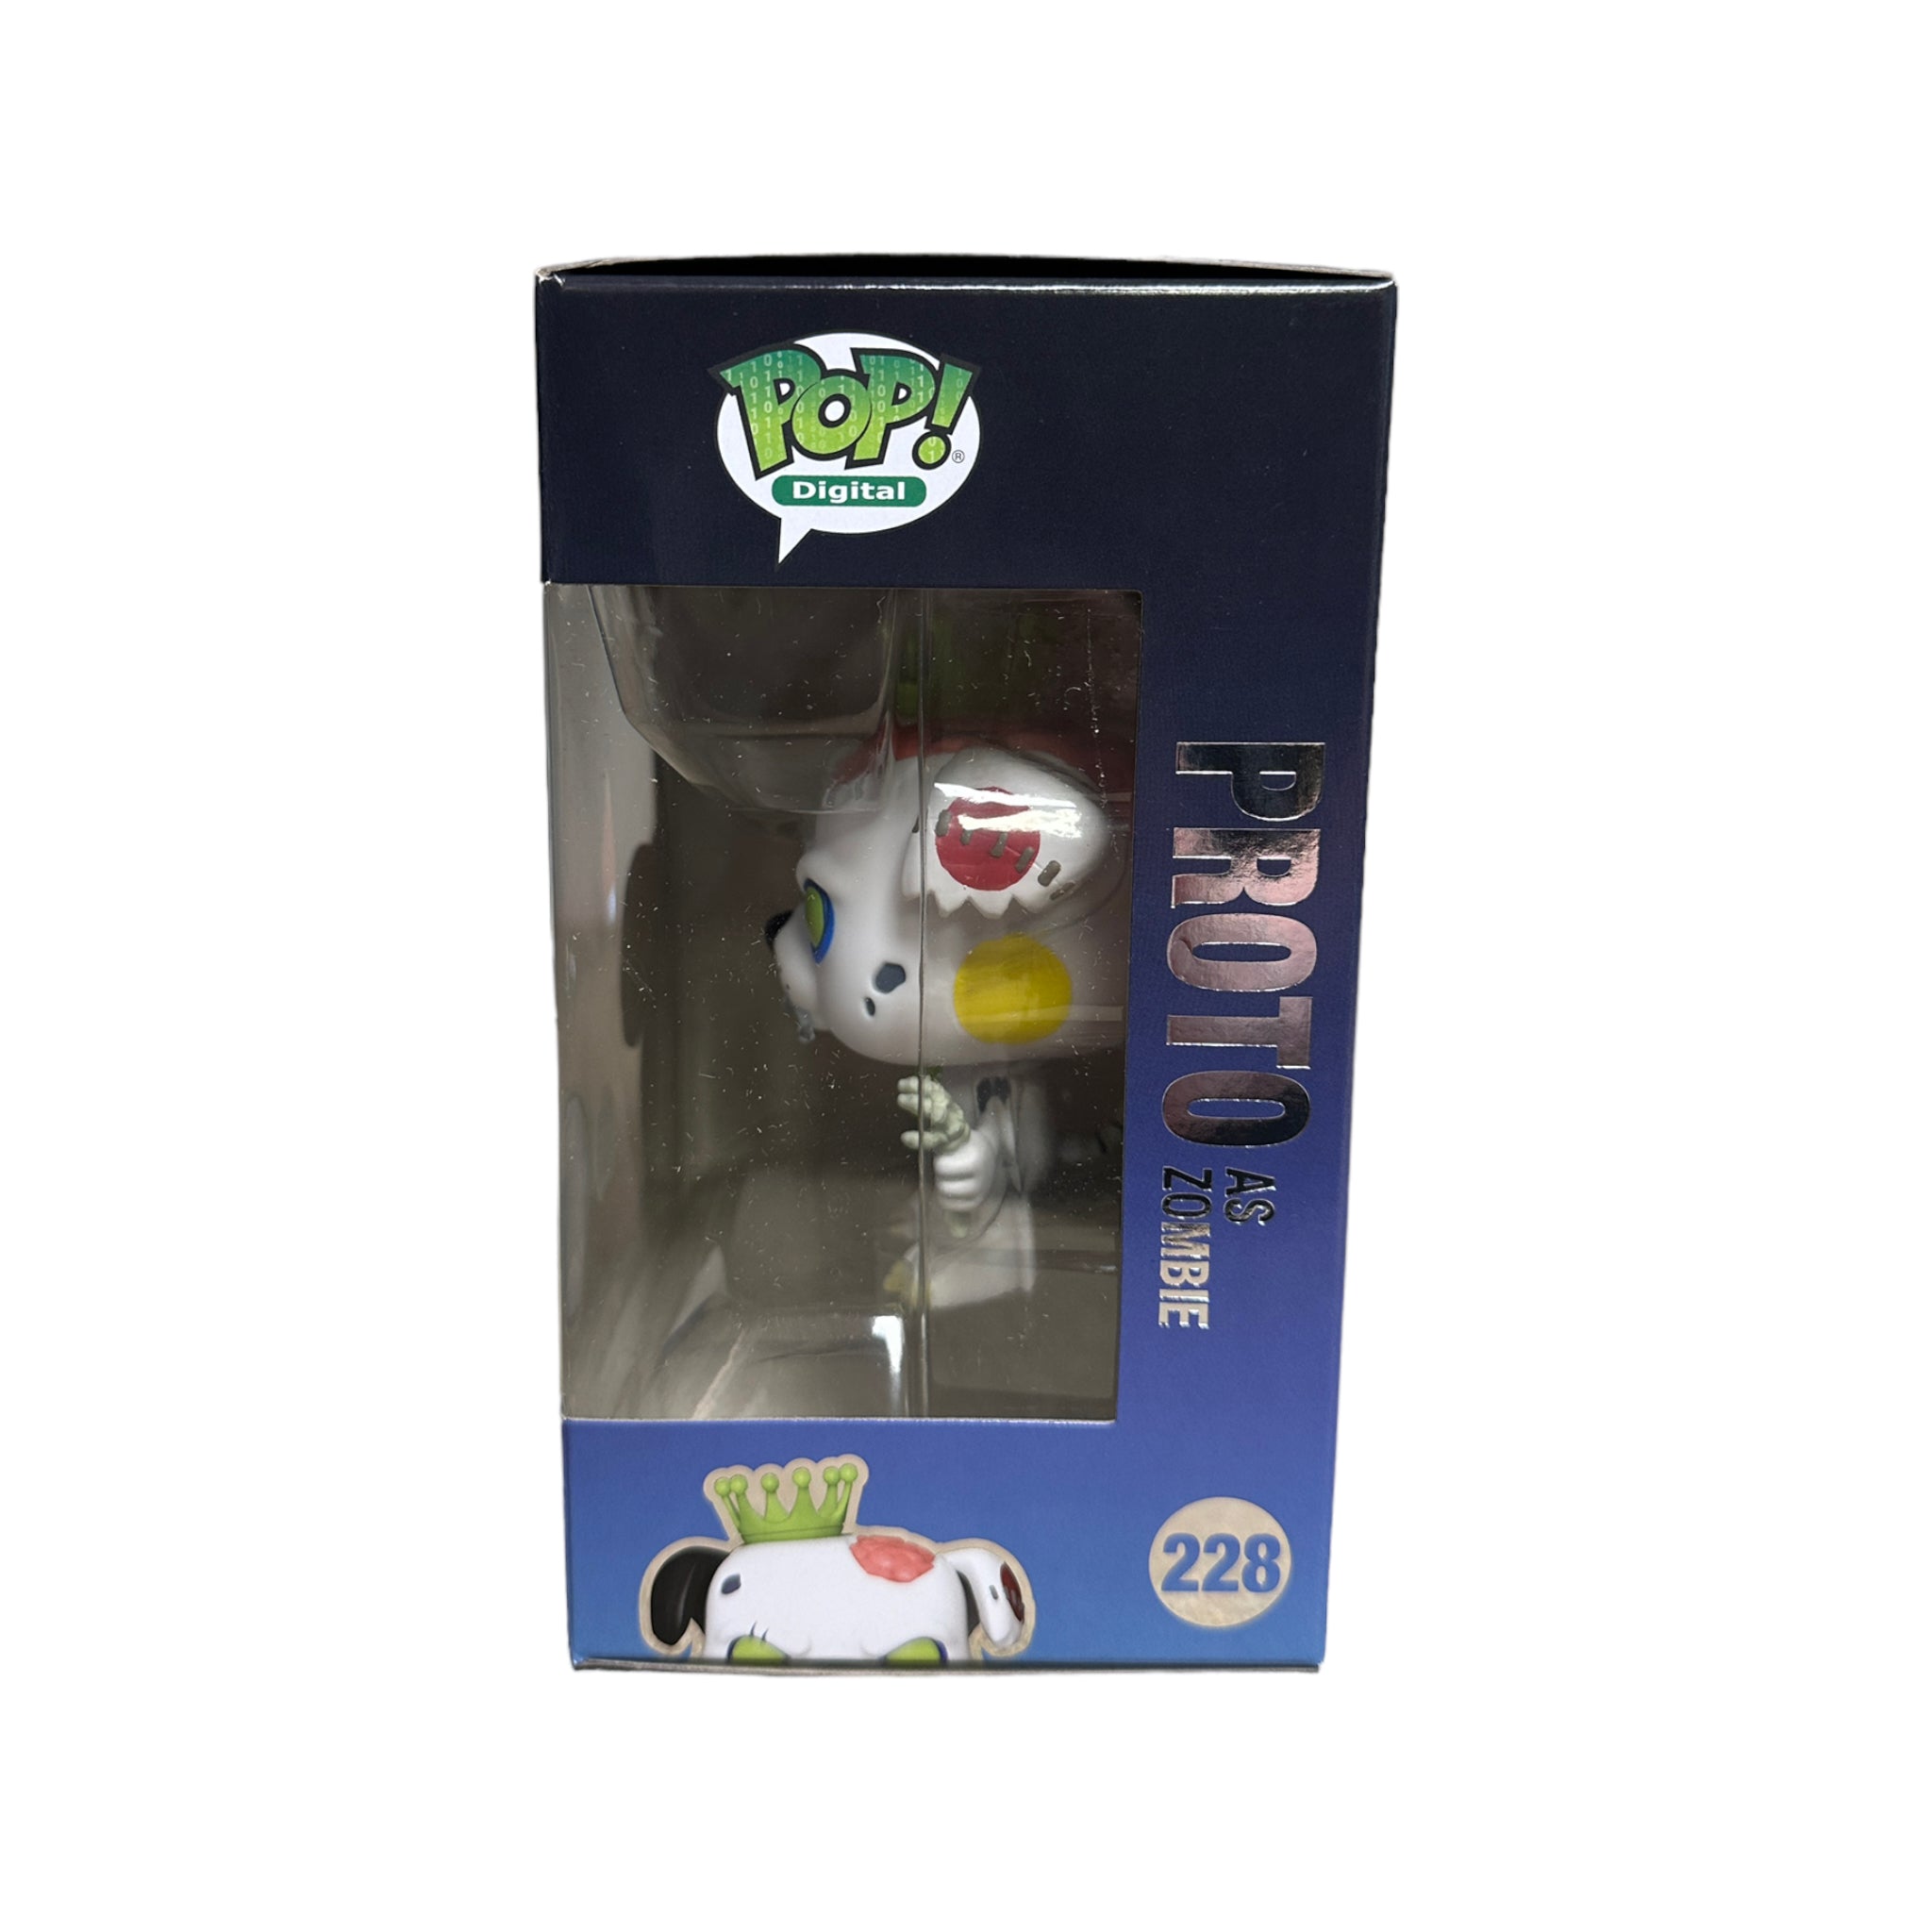 Proto as Zombie #228 (Glows in the Dark) Funko Pop! - Funkoween Series 1 - NFT Release Exclusive LE2500 Pcs - Condition 8.75/10